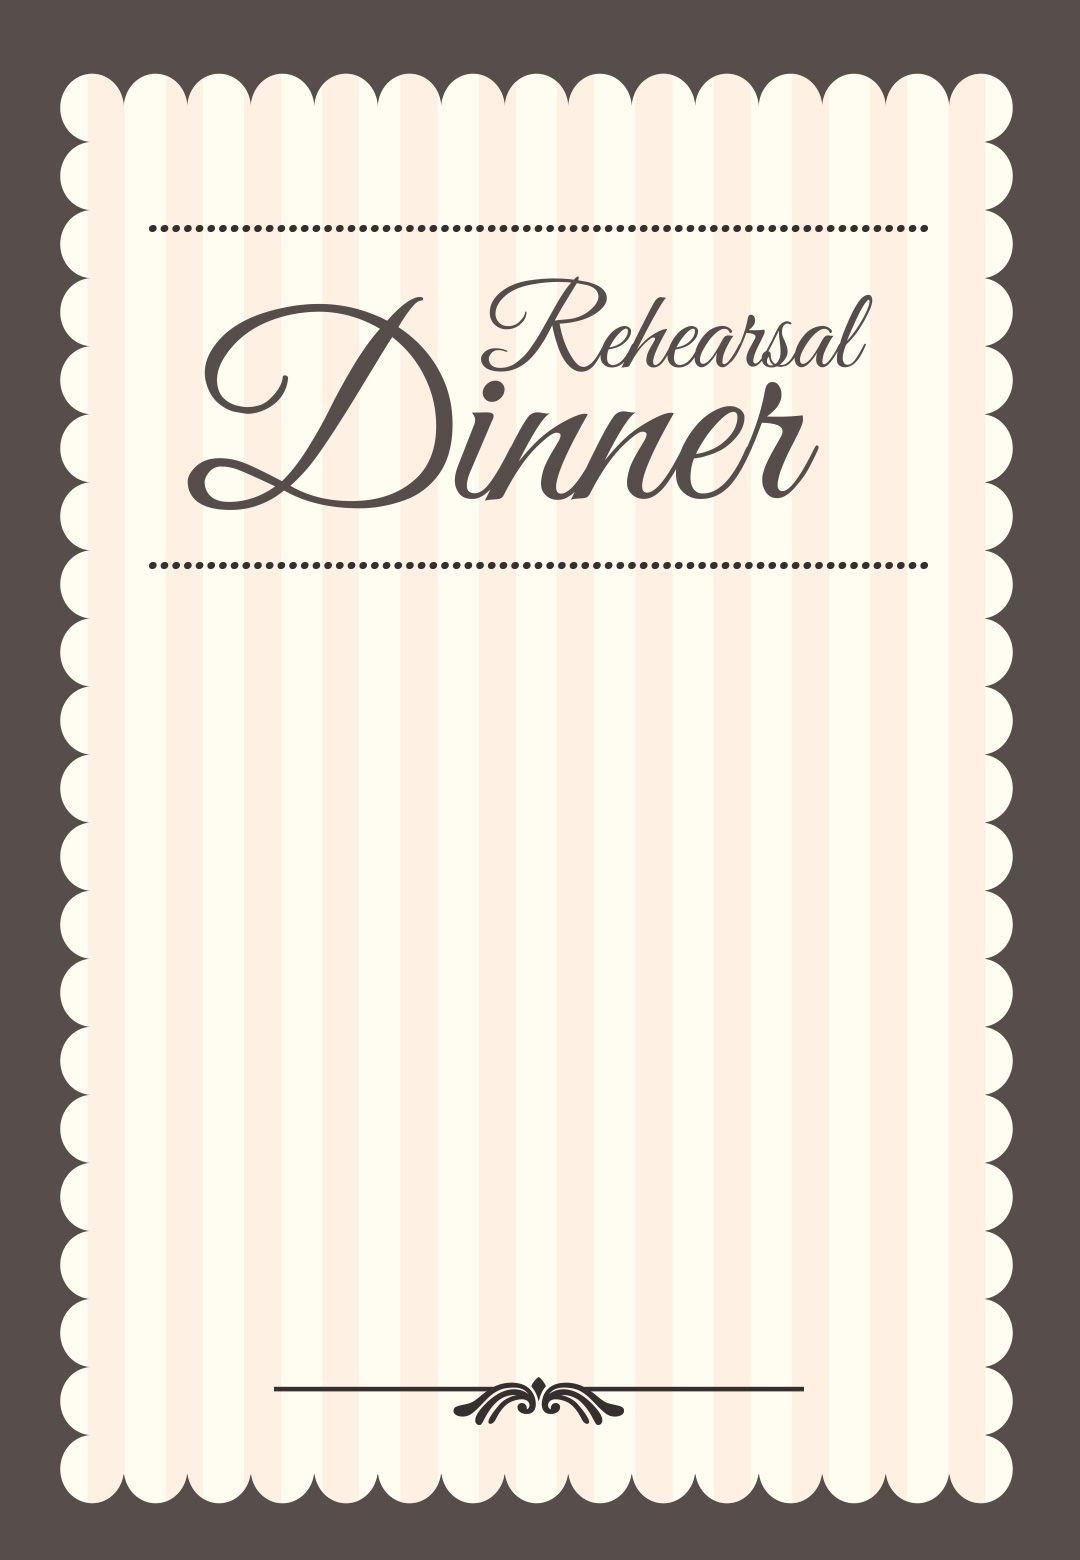 Stamped Rehearsal Dinner Free Printable Rehearsal Dinner Party pertaining to dimensions 1080 X 1560